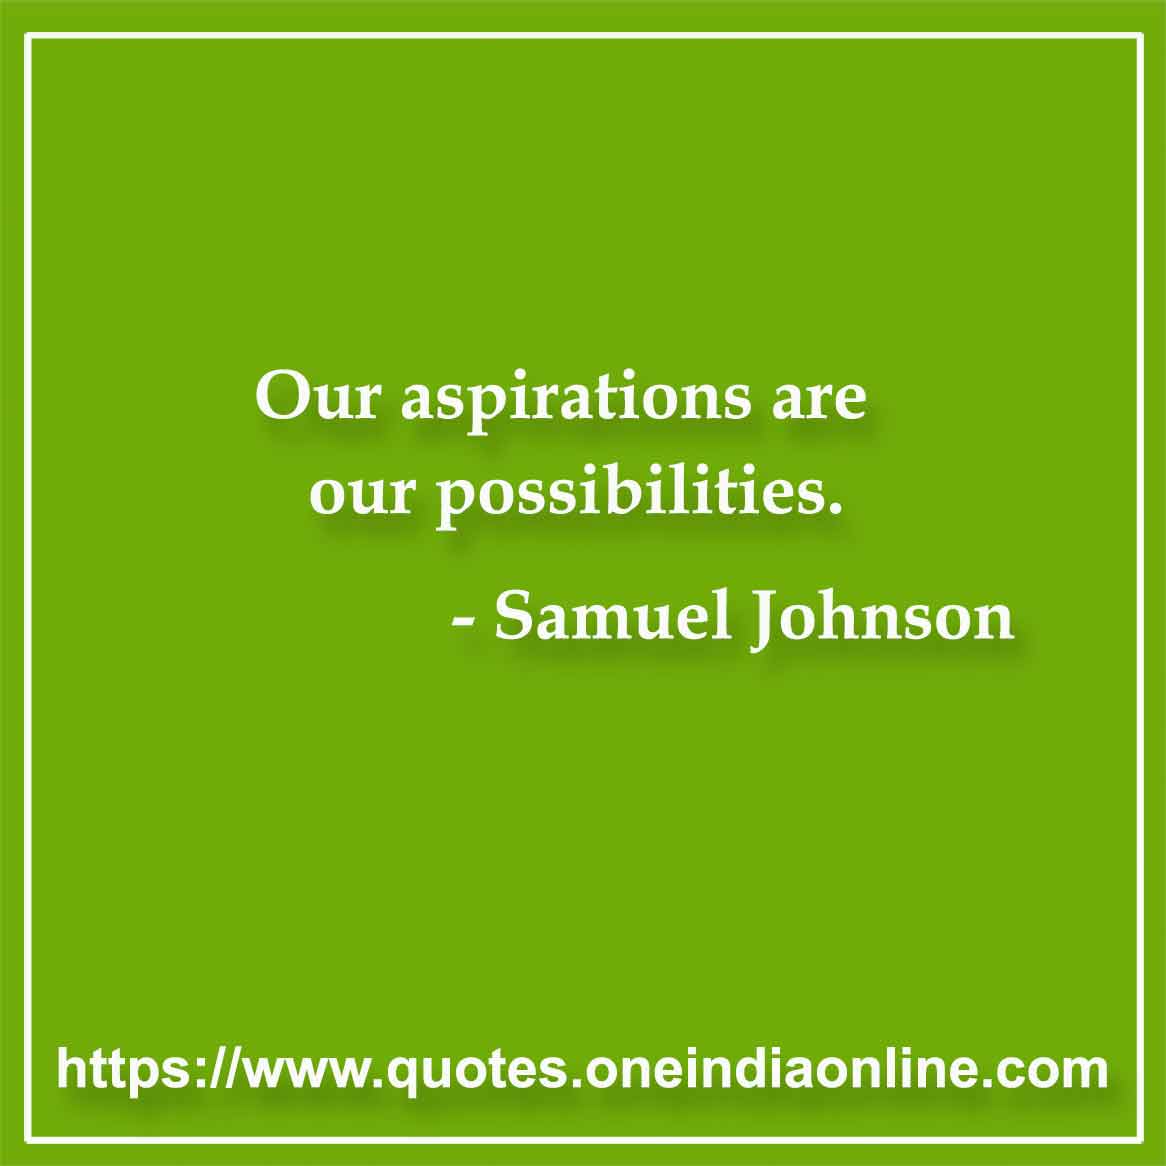 Our aspirations are our possibilities.

- Robert Browning